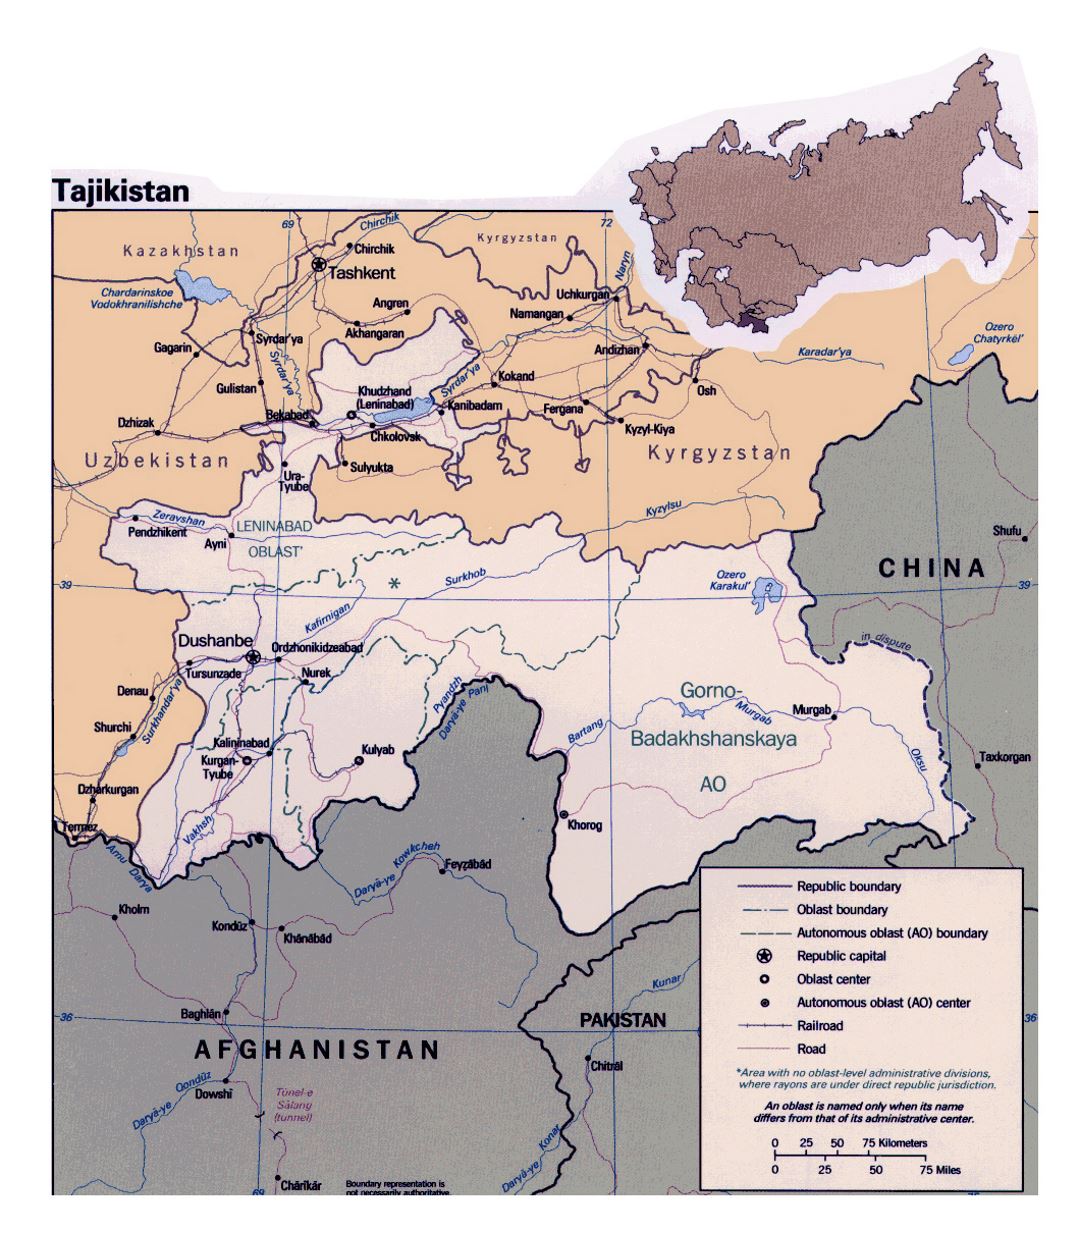 Detailed political and administrative map of Tajikistan with roads, railroads and major cities